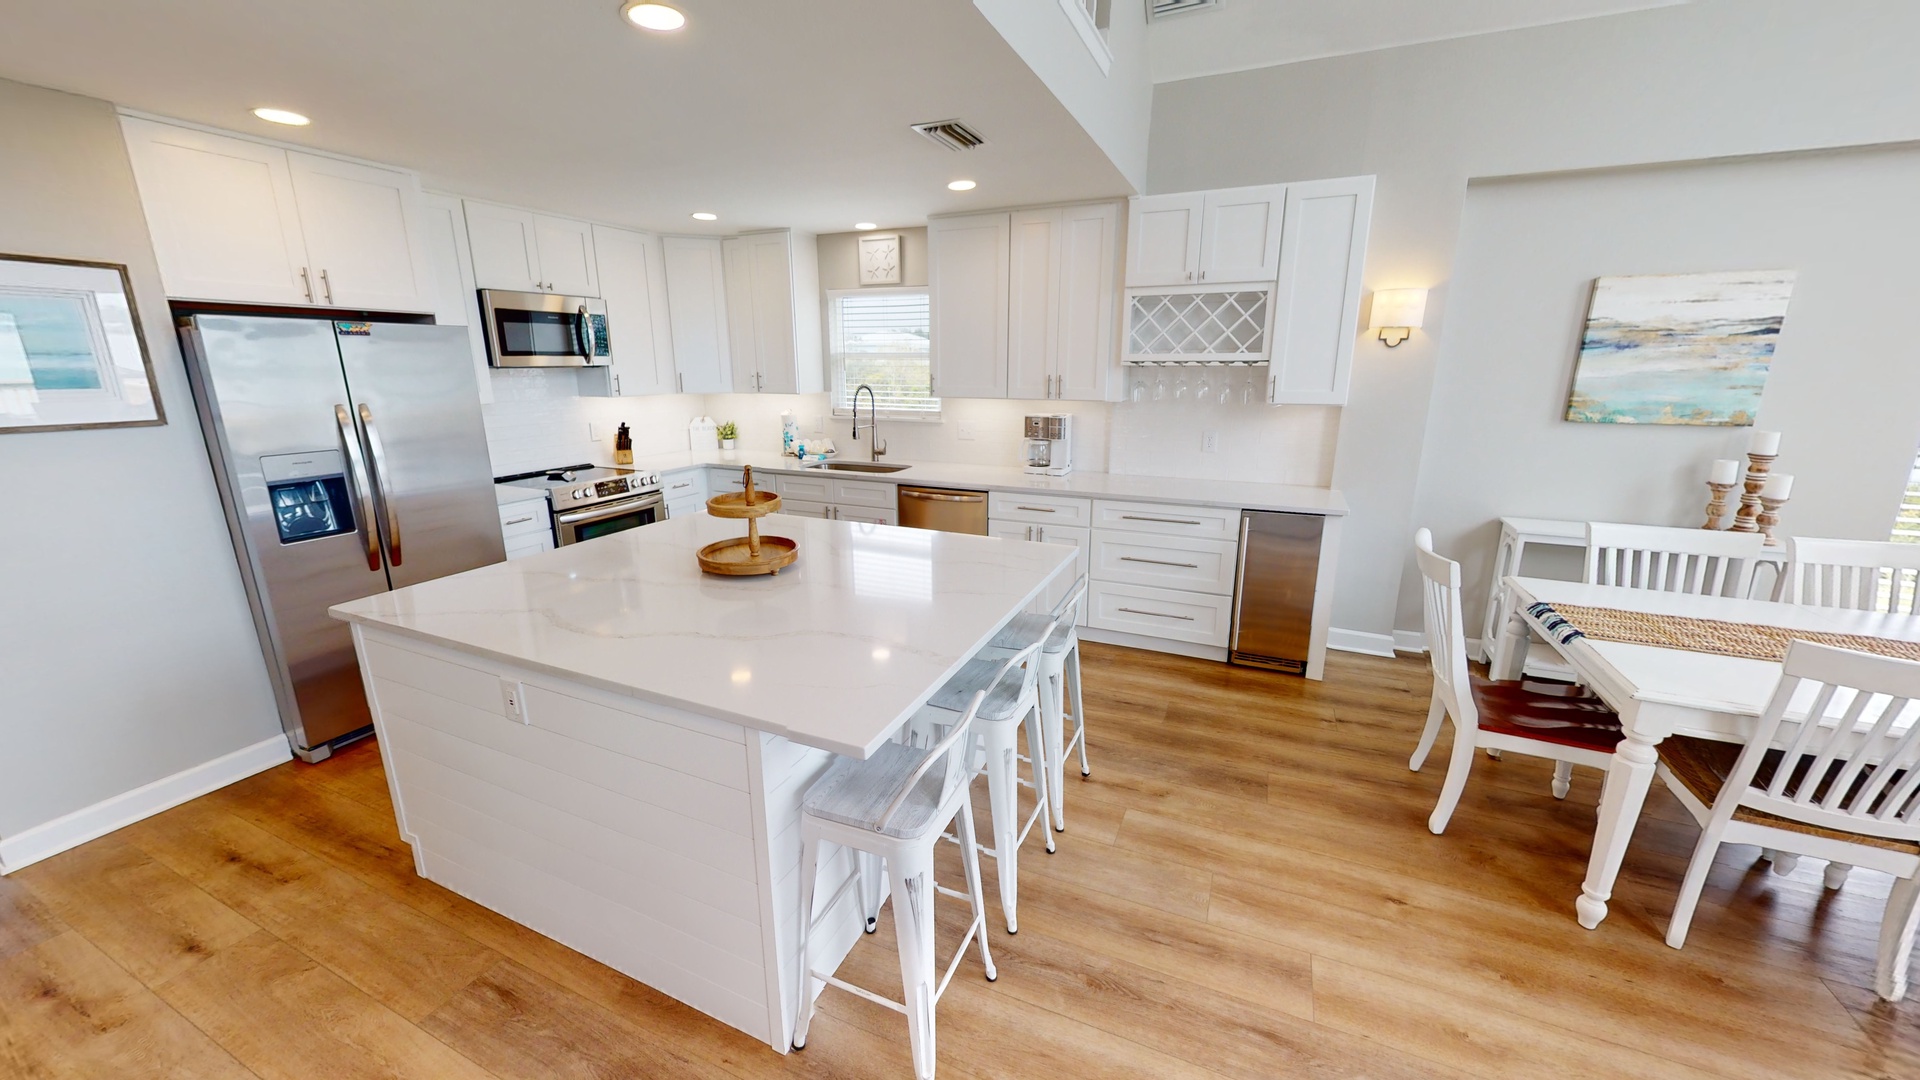 Gorgeous updated kitchen with additional seating at the island